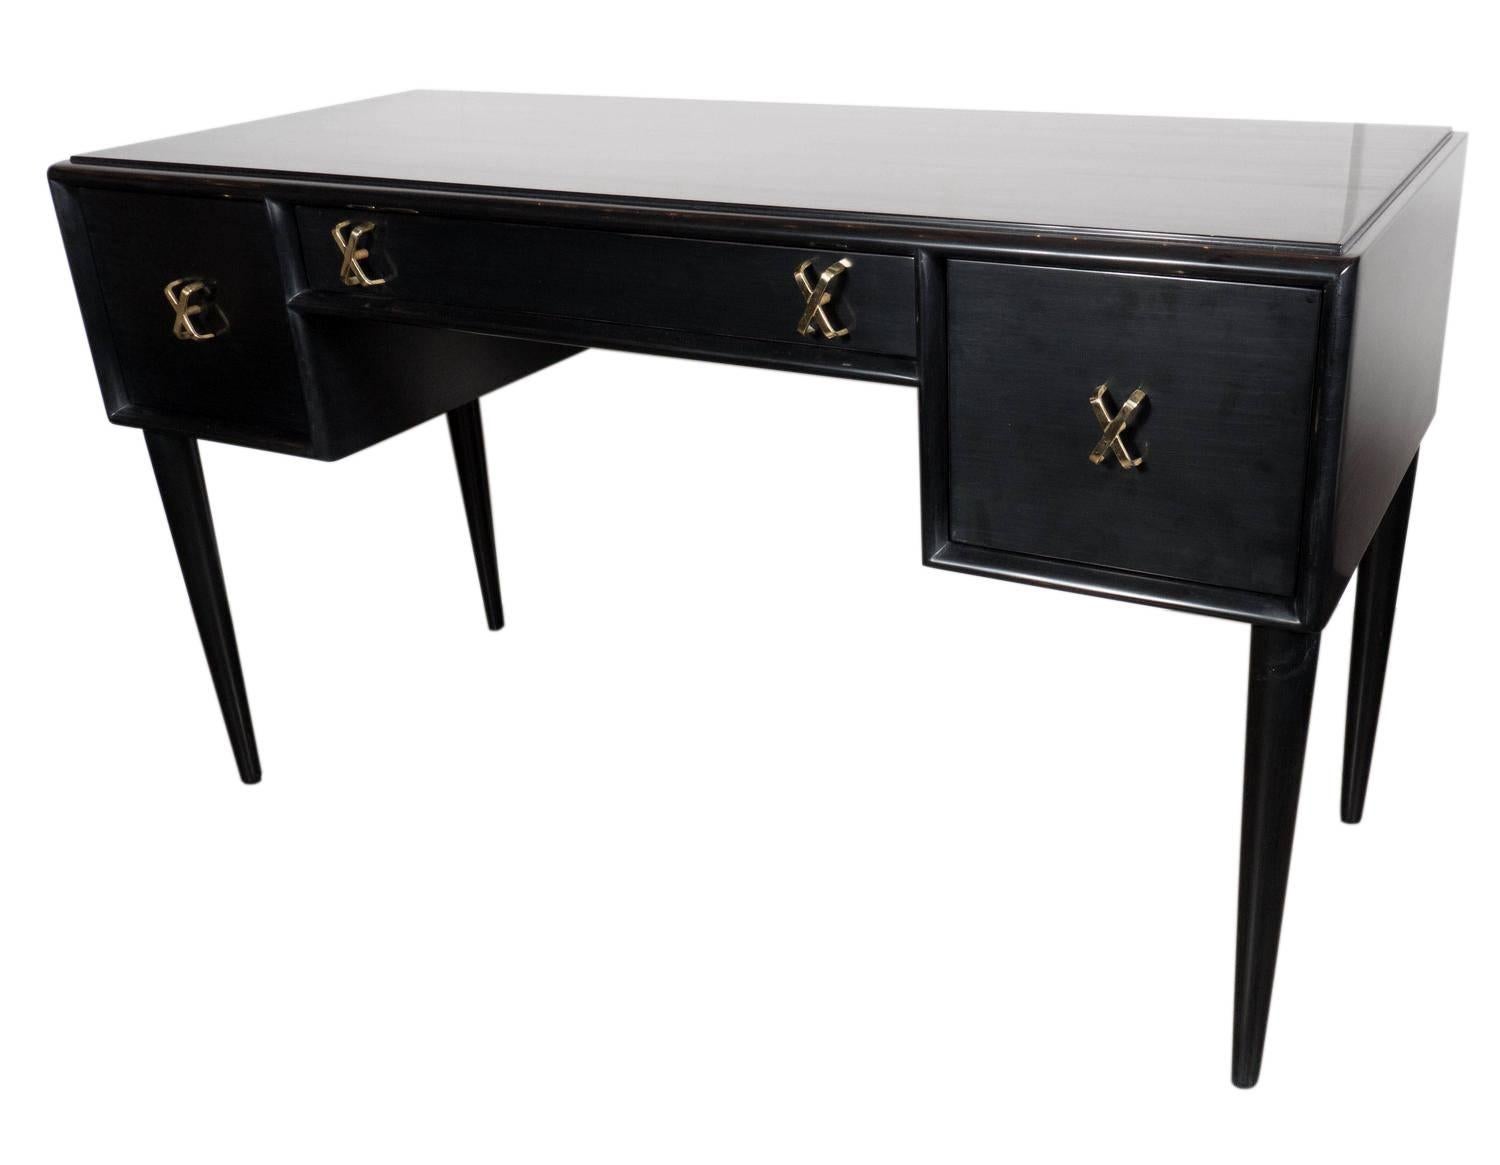 Elegant desk or vanity designed by Paul Frankl for Johnson Furniture, American, circa 1950s. This piece is currently being refinished and can be completed in your choice of color. The price noted includes refinishing in your choice of color. We can